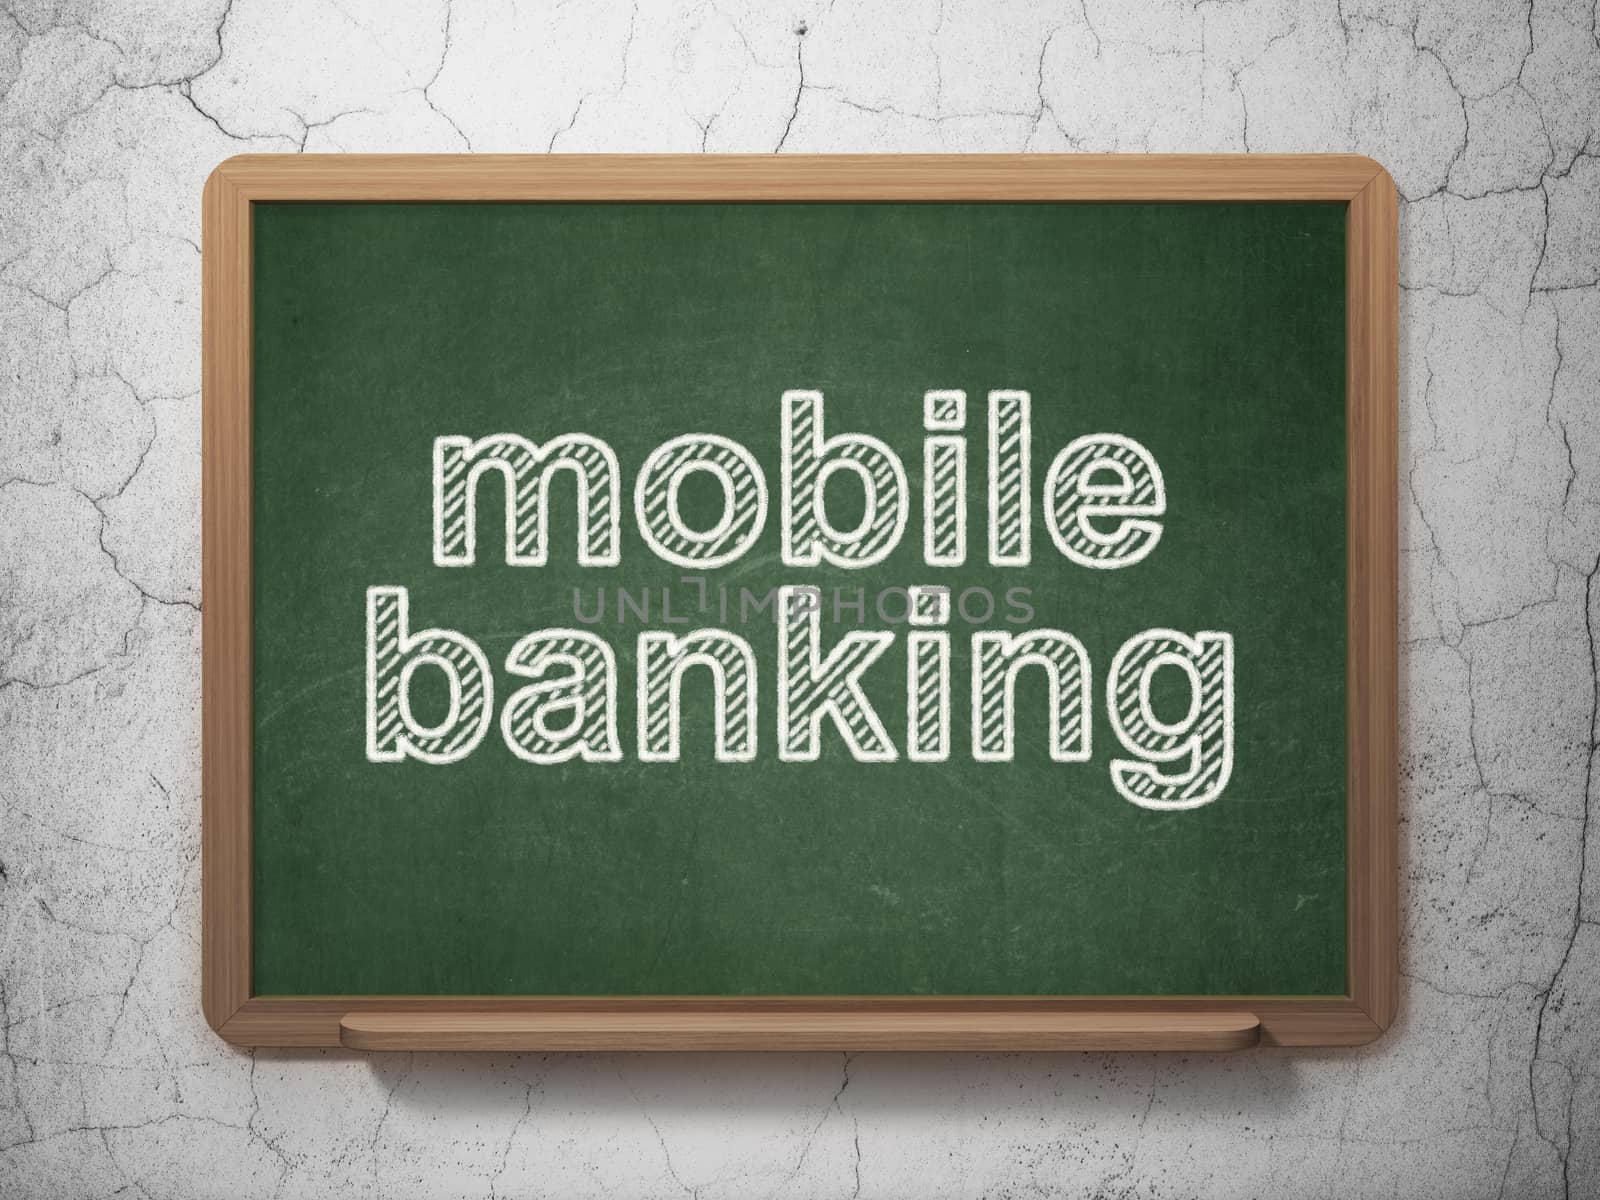 Banking concept: text Mobile Banking on Green chalkboard on grunge wall background, 3D rendering